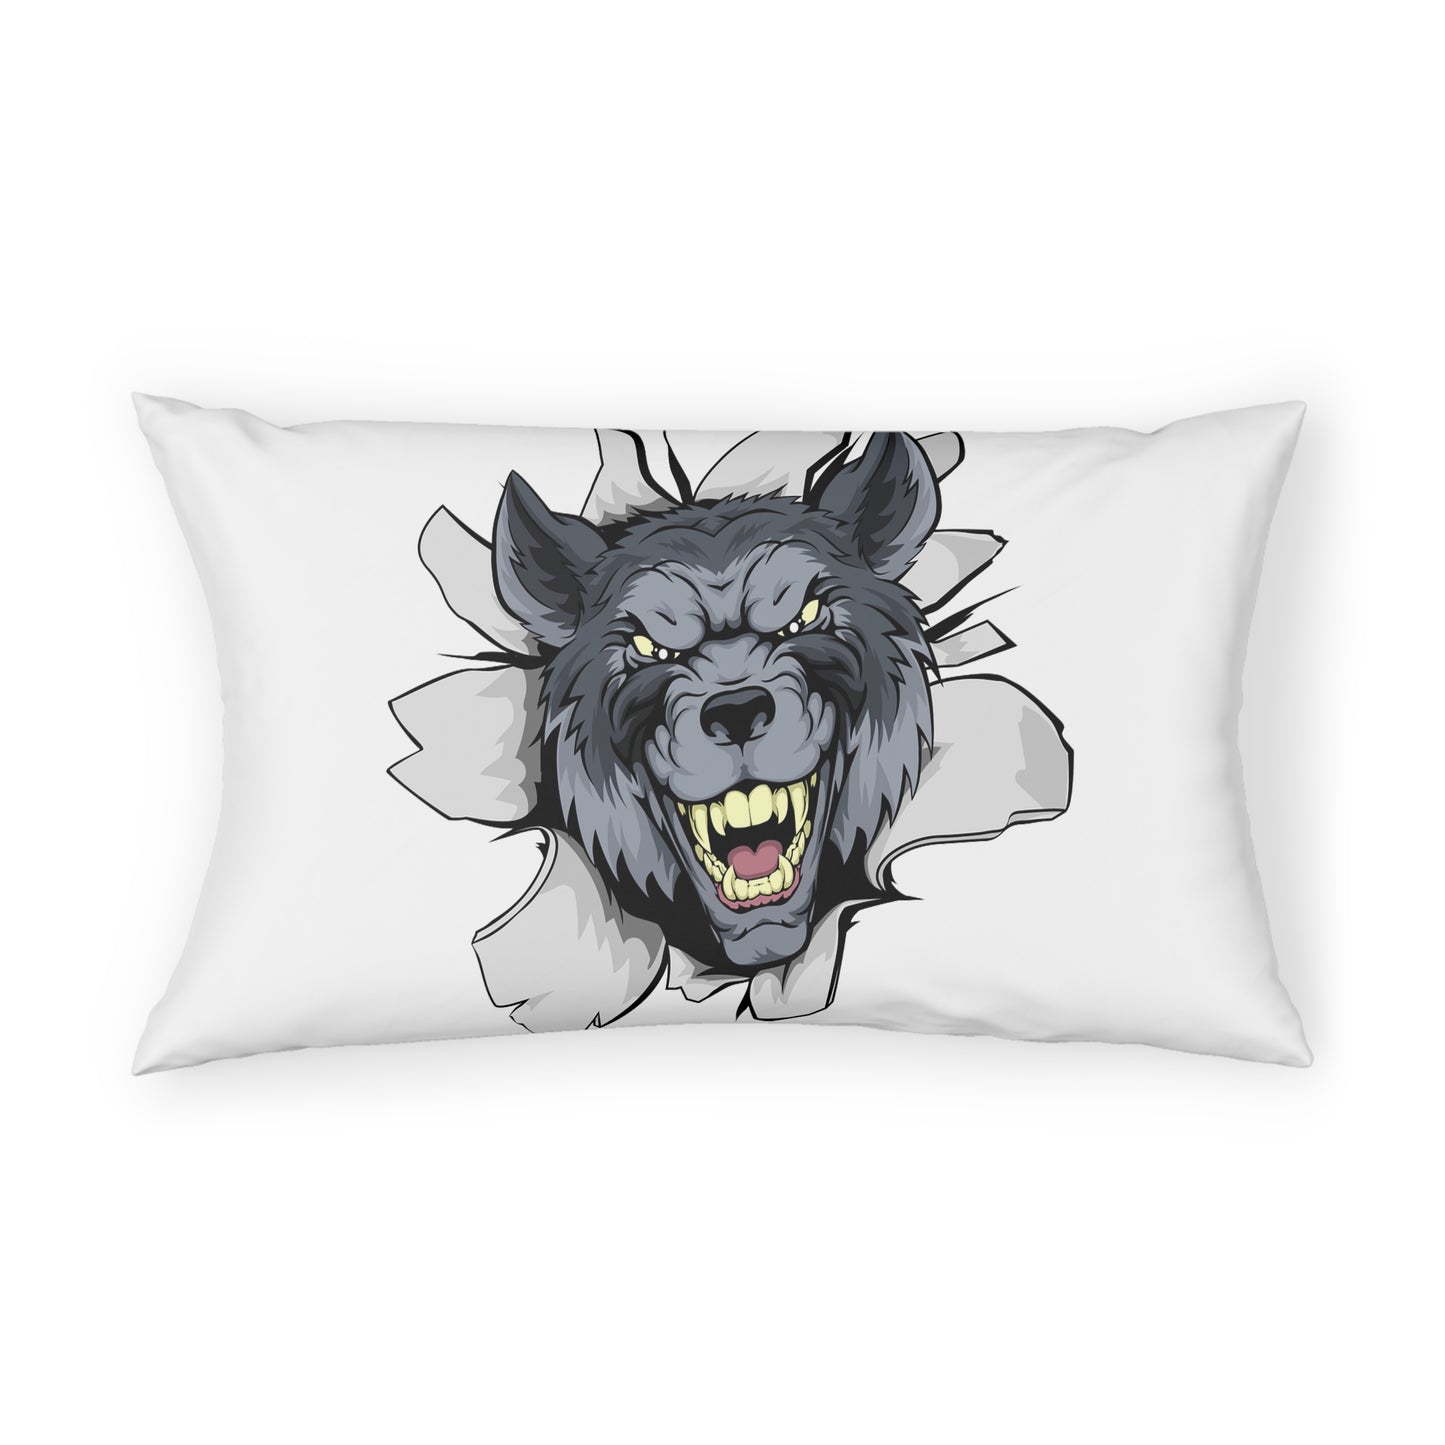 Pillow Sham "Angry Wolf"